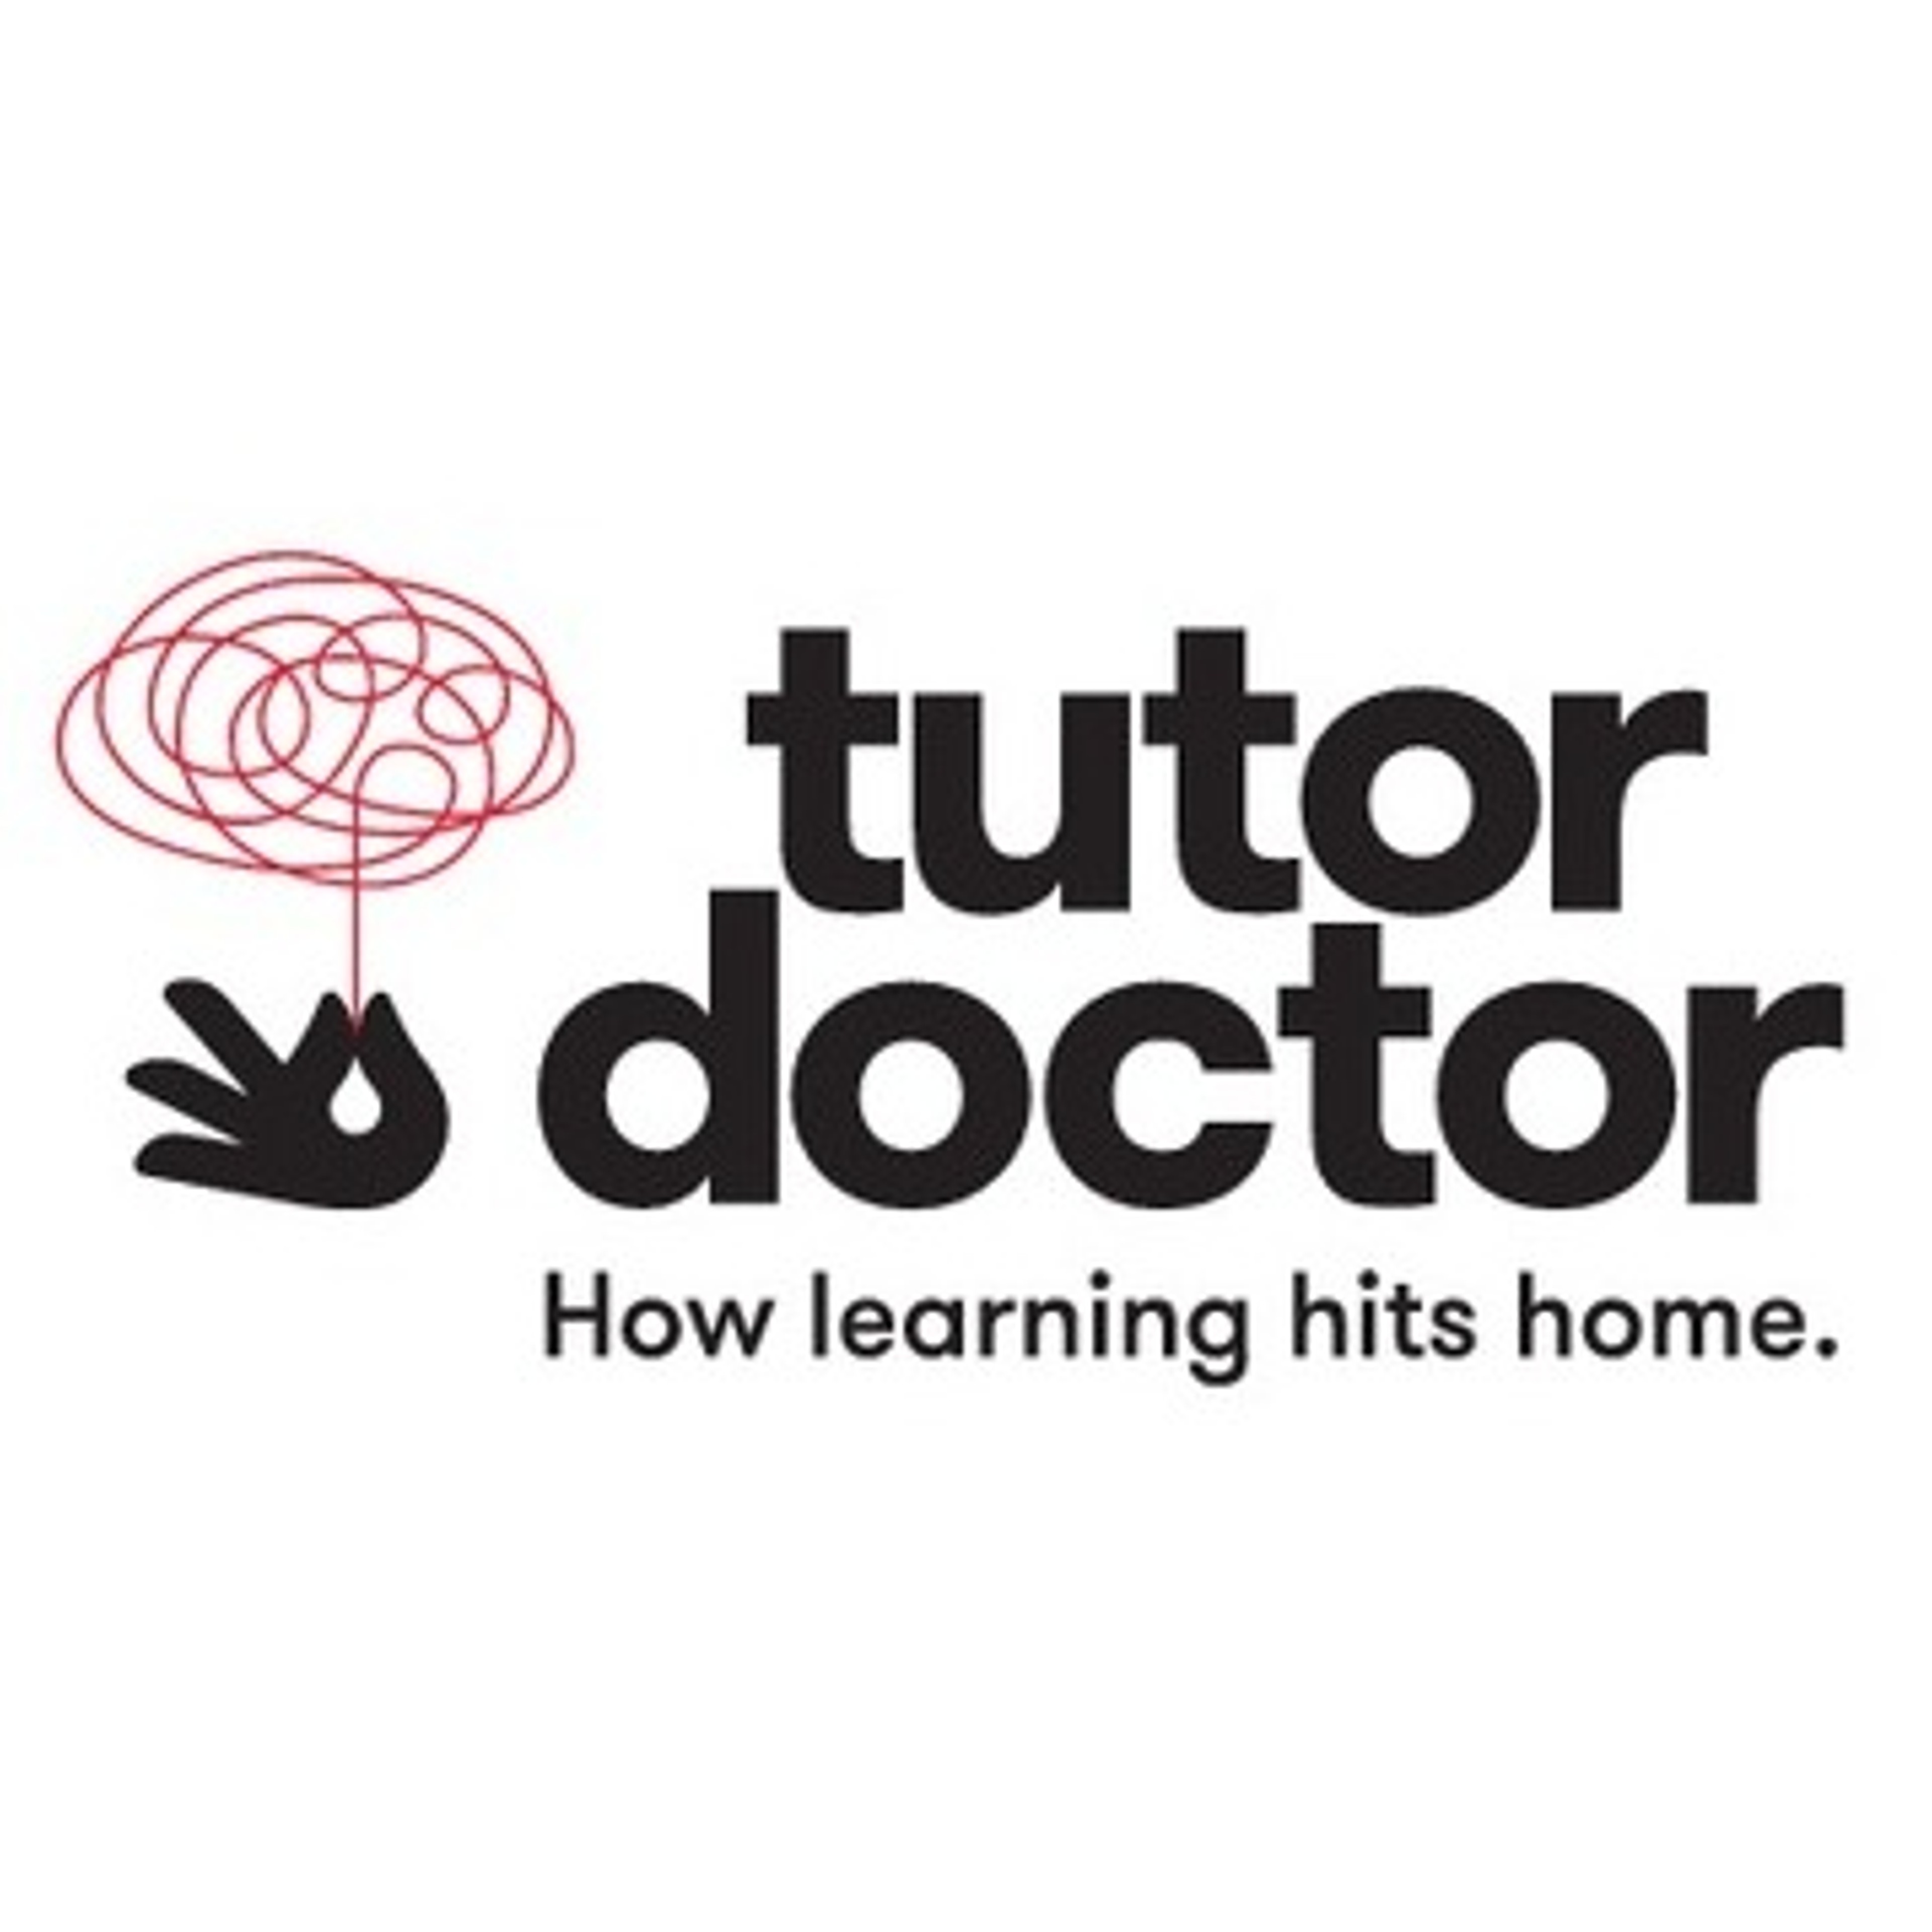 Tutor Doctor provides in-home, one-on-one tutoring for all ages, levels, and subjects.